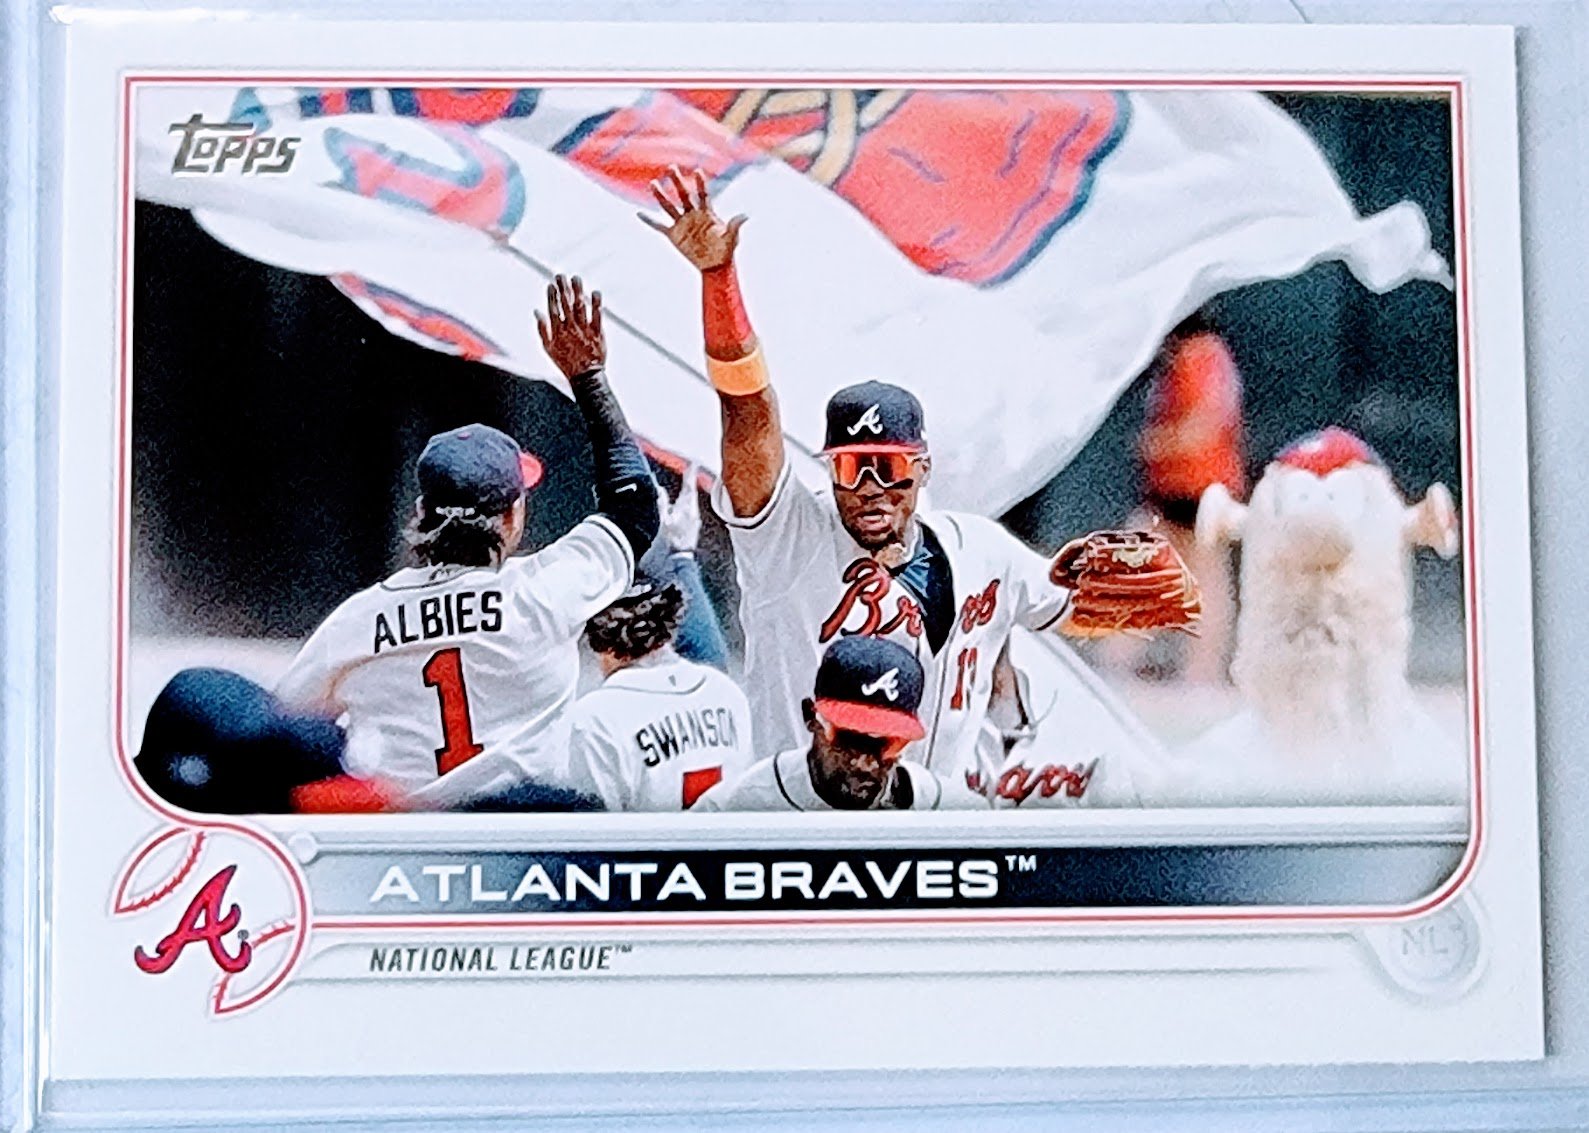 2022 Topps Atlanta Braves Team Baseball Trading Card GRB1 simple Xclusive Collectibles   